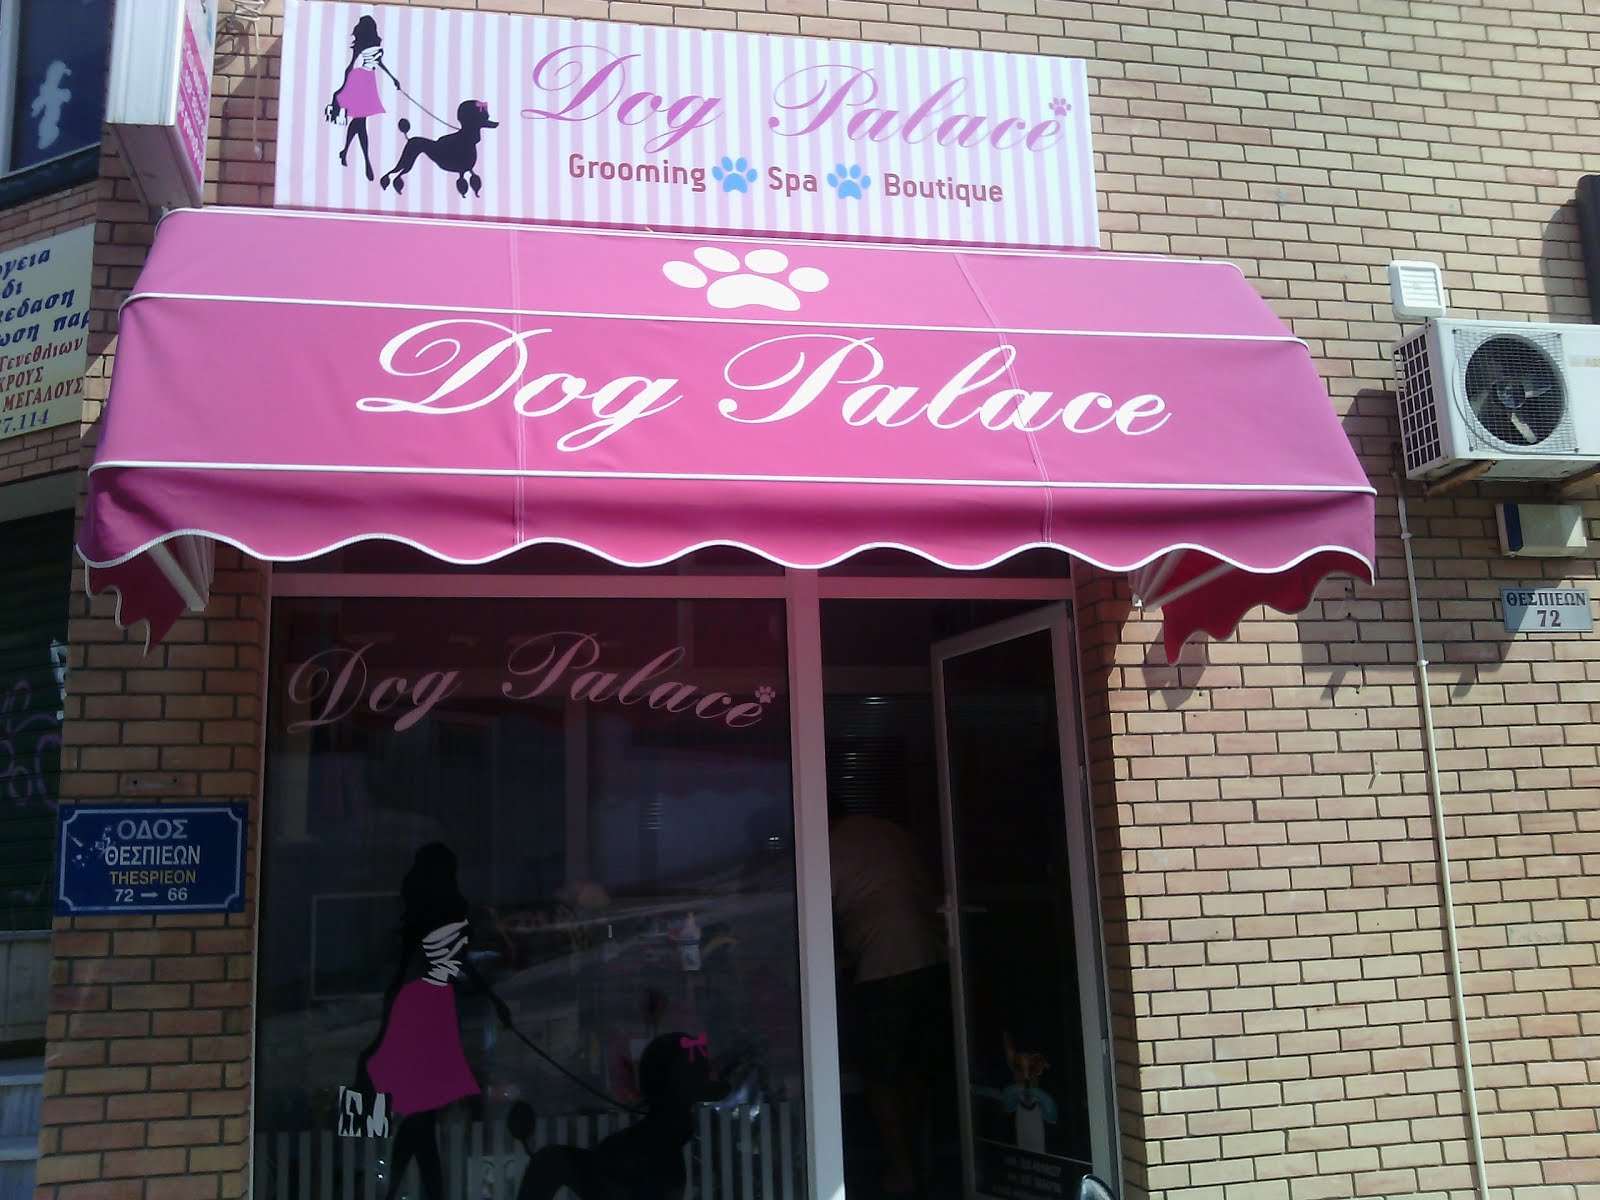 DOGPALACE   and GROOMING SCHOOL